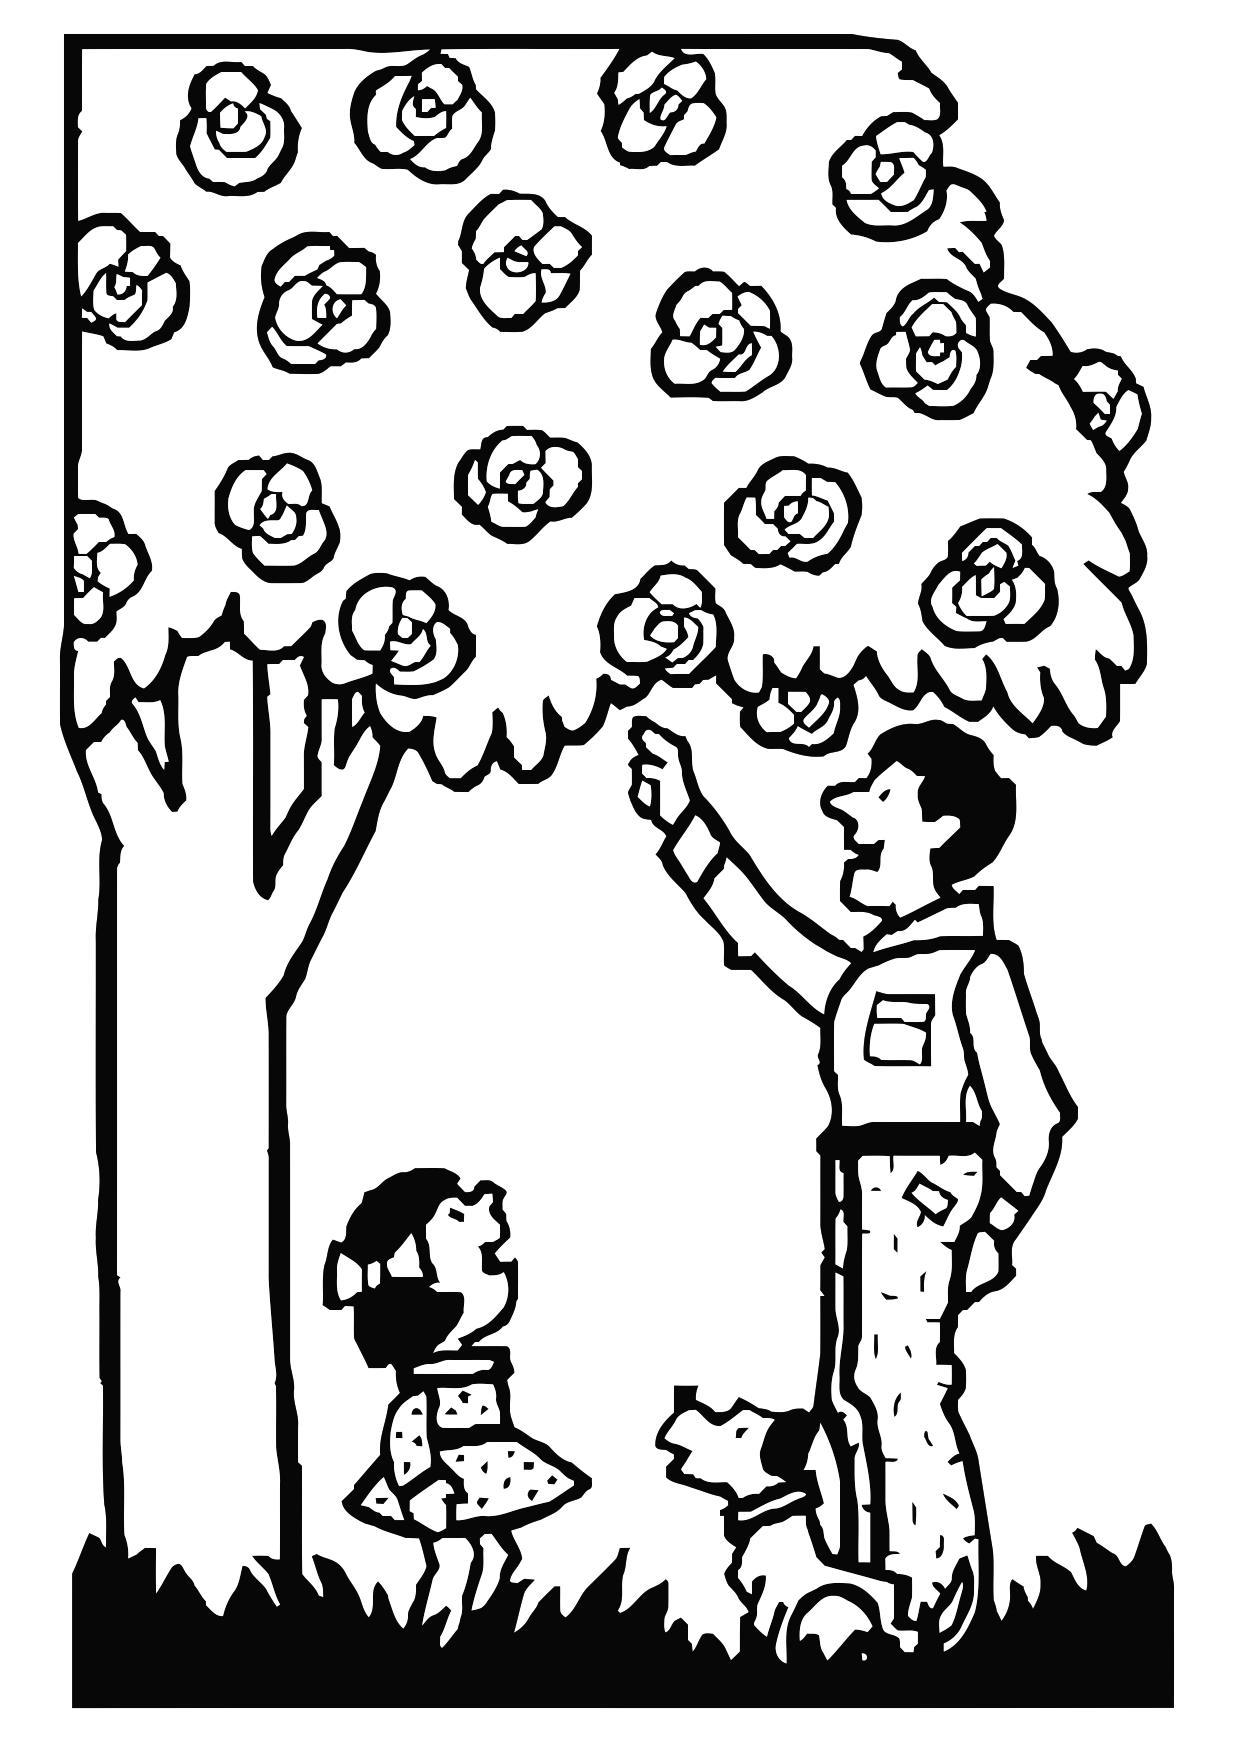 Coloring Page father and daughter - free printable coloring pages - Img